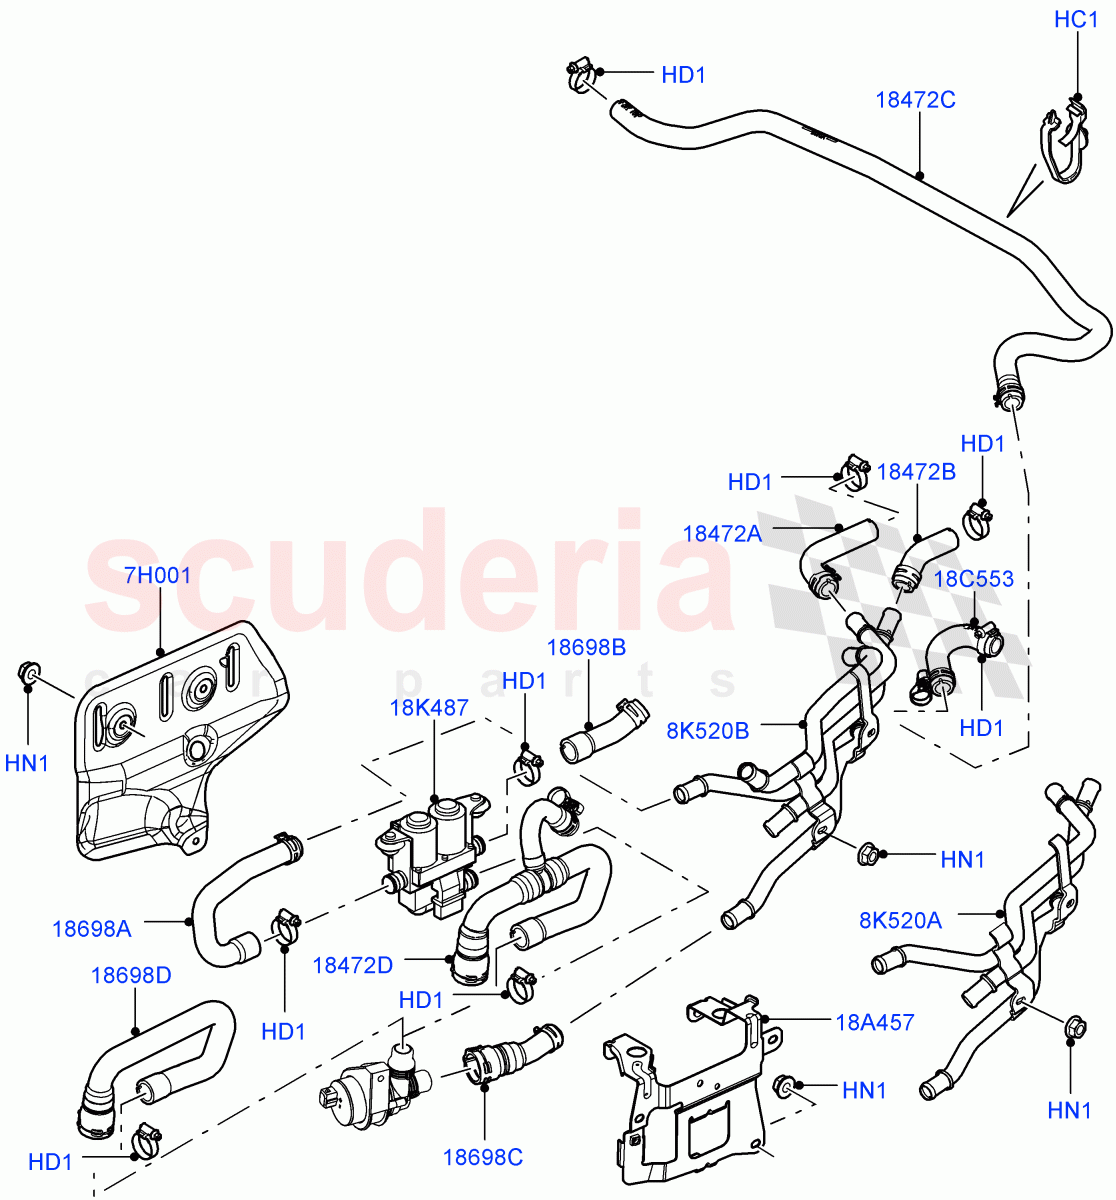 Heater Hoses(Heater Water Control, Front)((V)FROMAA000001,(V)TOAA999999) of Land Rover Land Rover Range Rover (2010-2012) [4.4 DOHC Diesel V8 DITC]